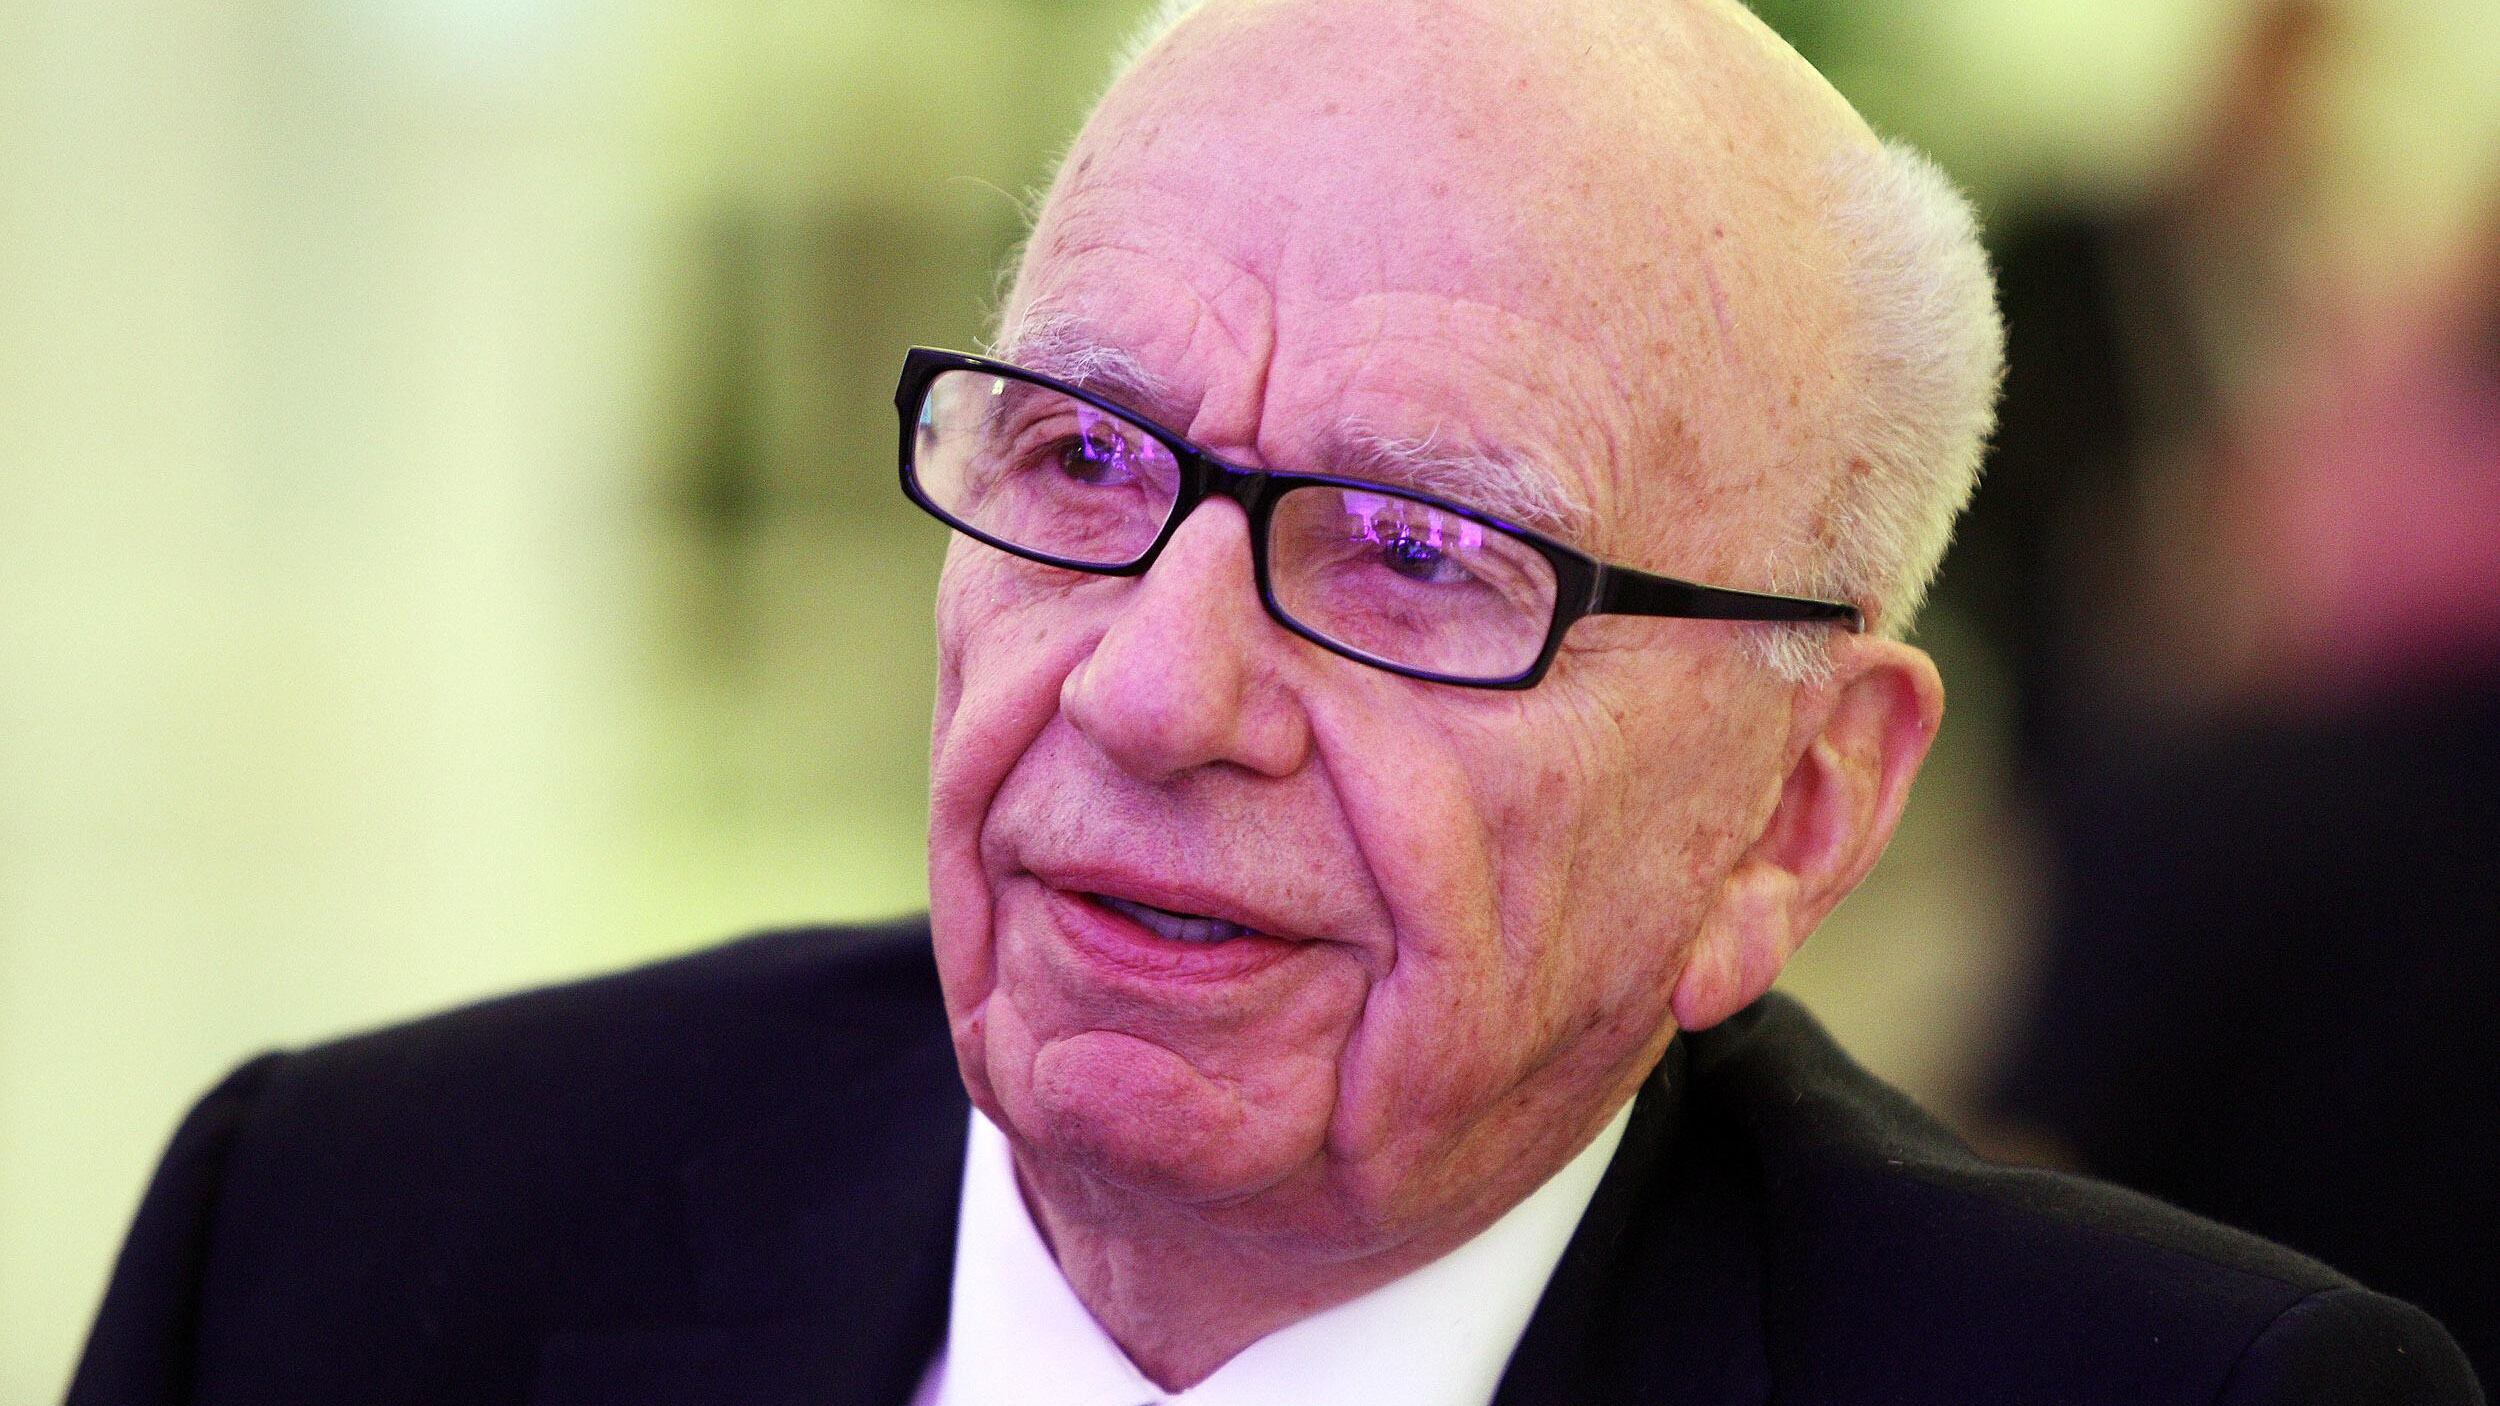 Rupert Murdoch was executive chairman of News Corp and director of NGN’s parent company and News Corp’s subsidiary, News International, now News UK